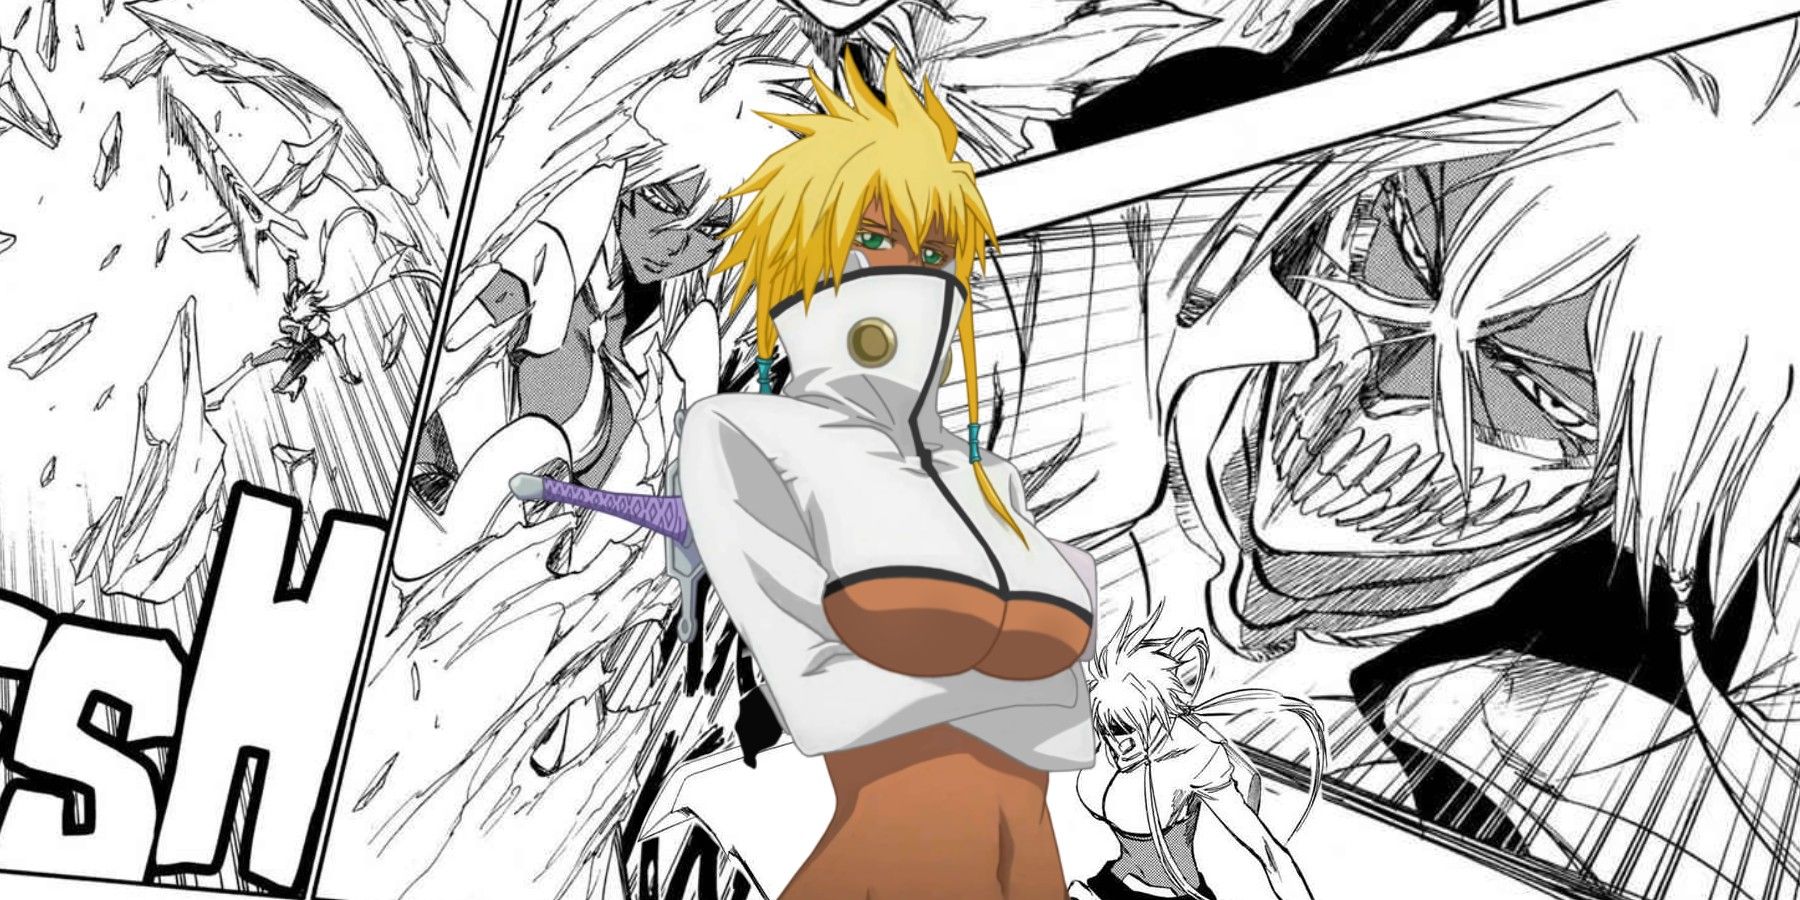 Bleach What Happened To Tier Harribel At The End Of The Series